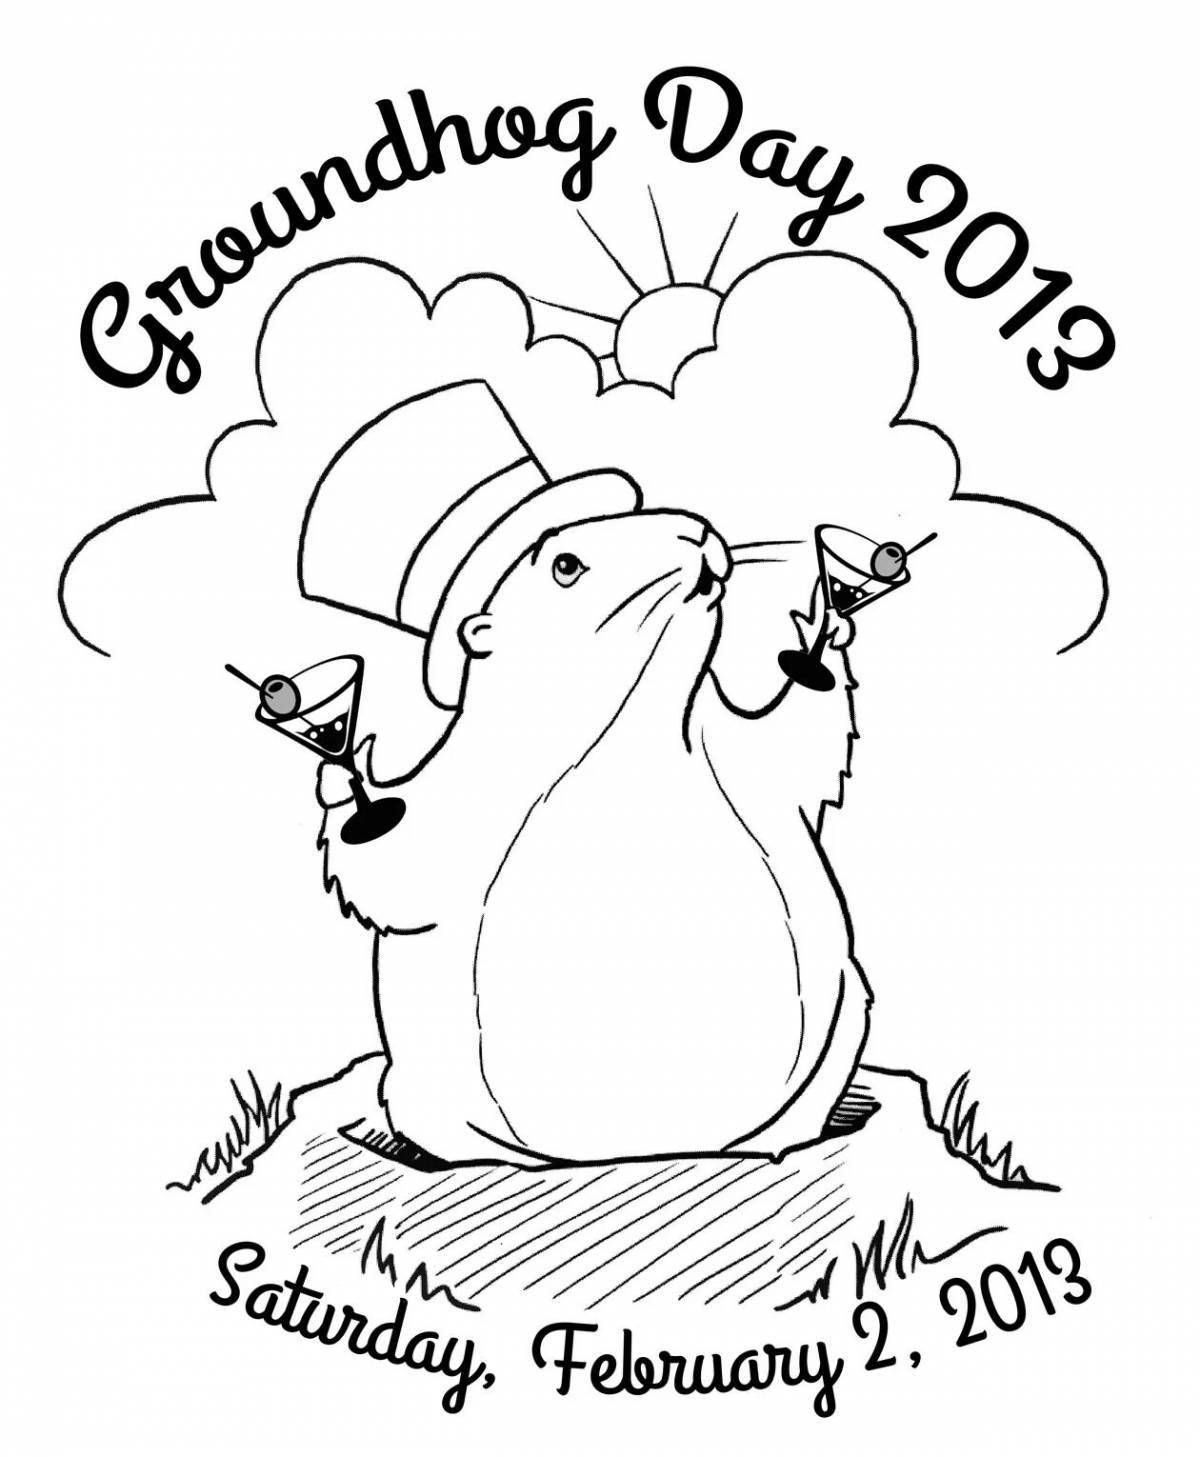 Great Groundhog Day coloring page